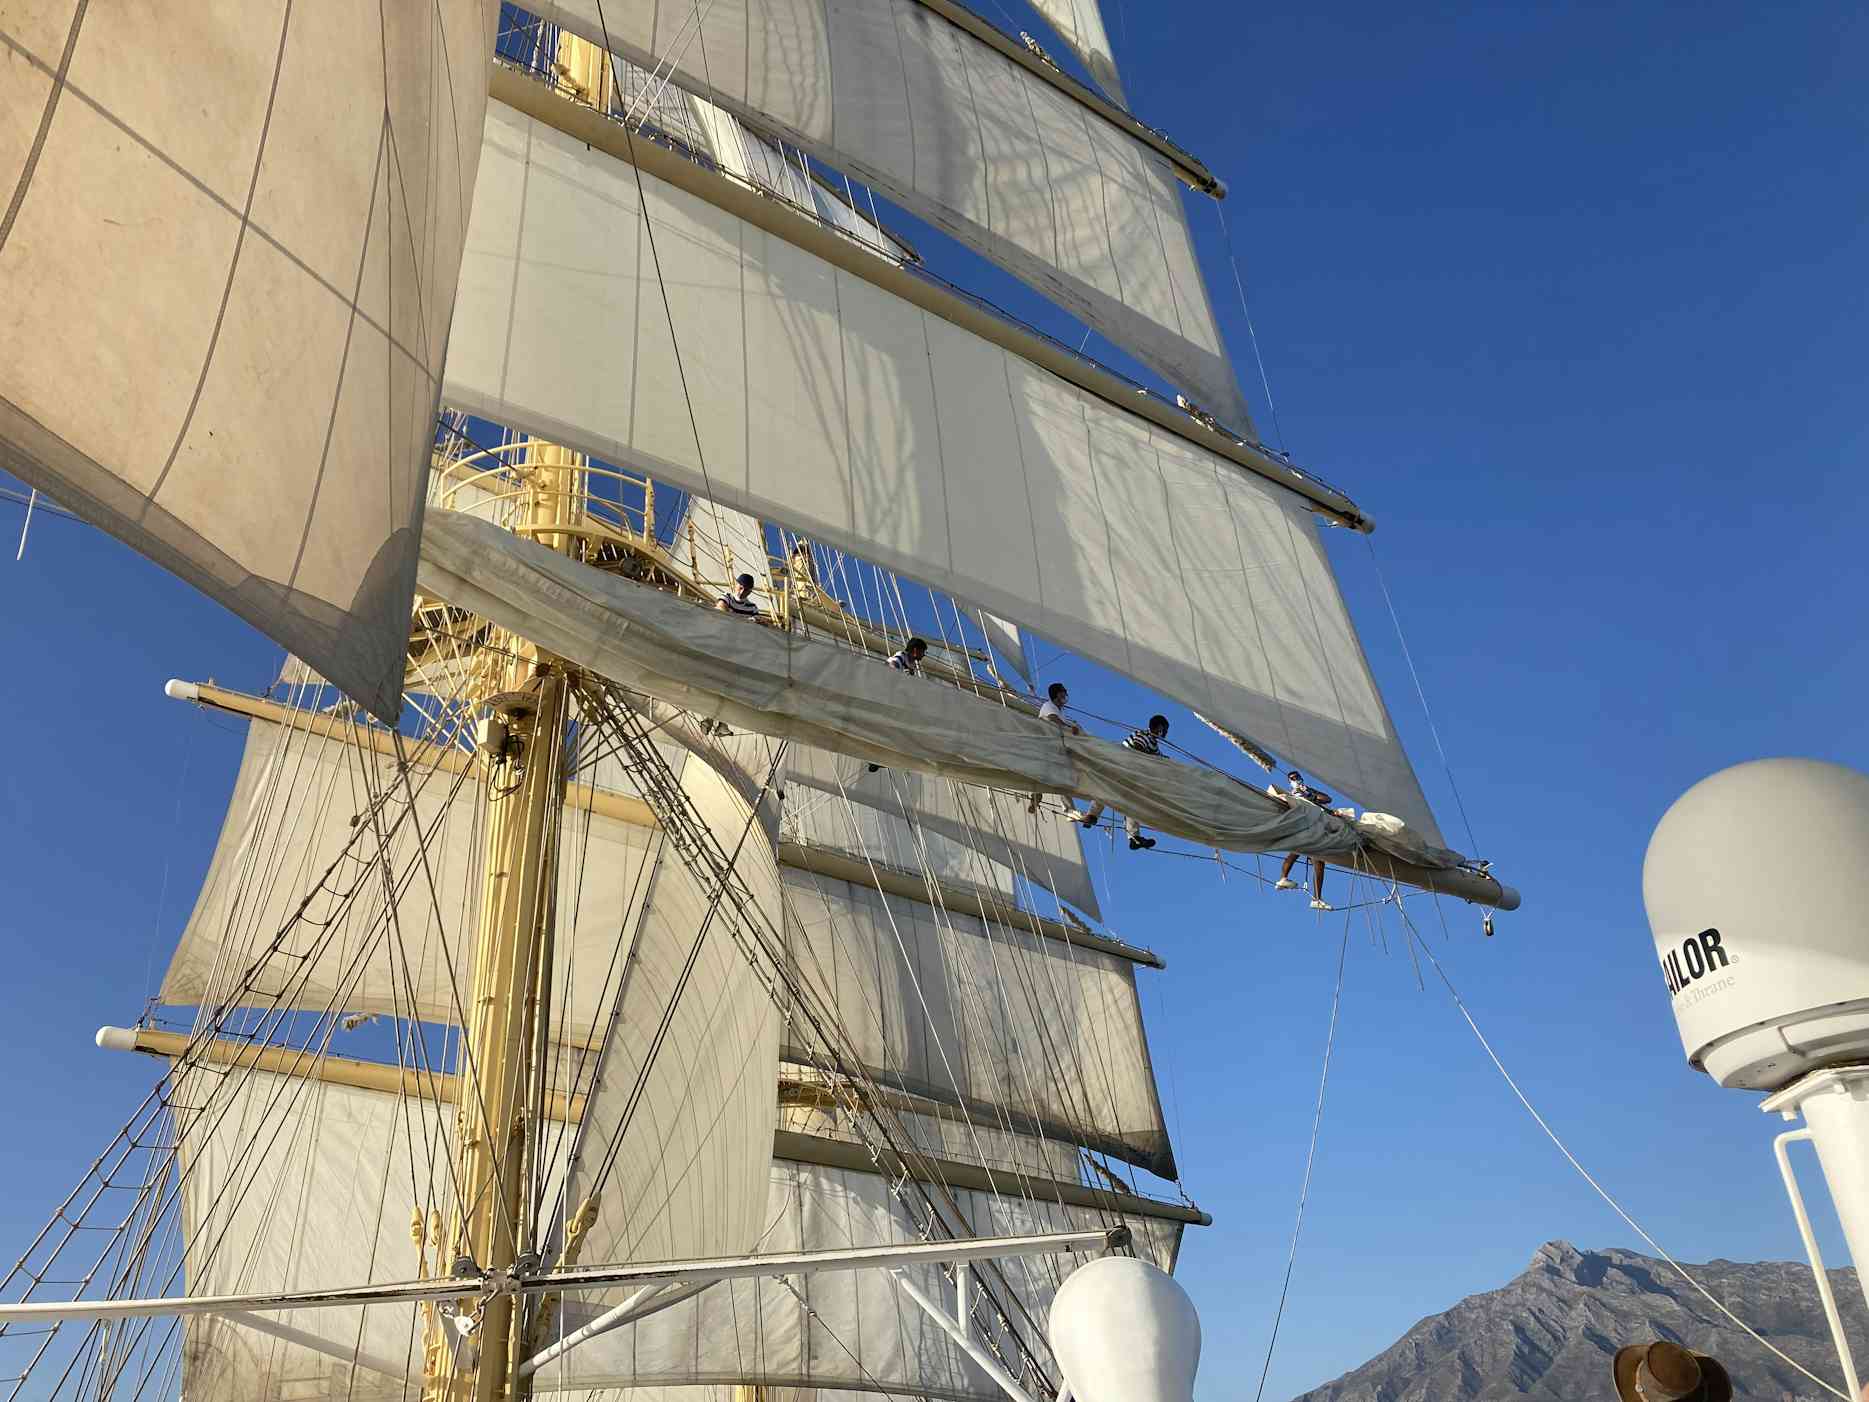 Our Favorite Boat Paints in 2024 - Sail Top Reviews